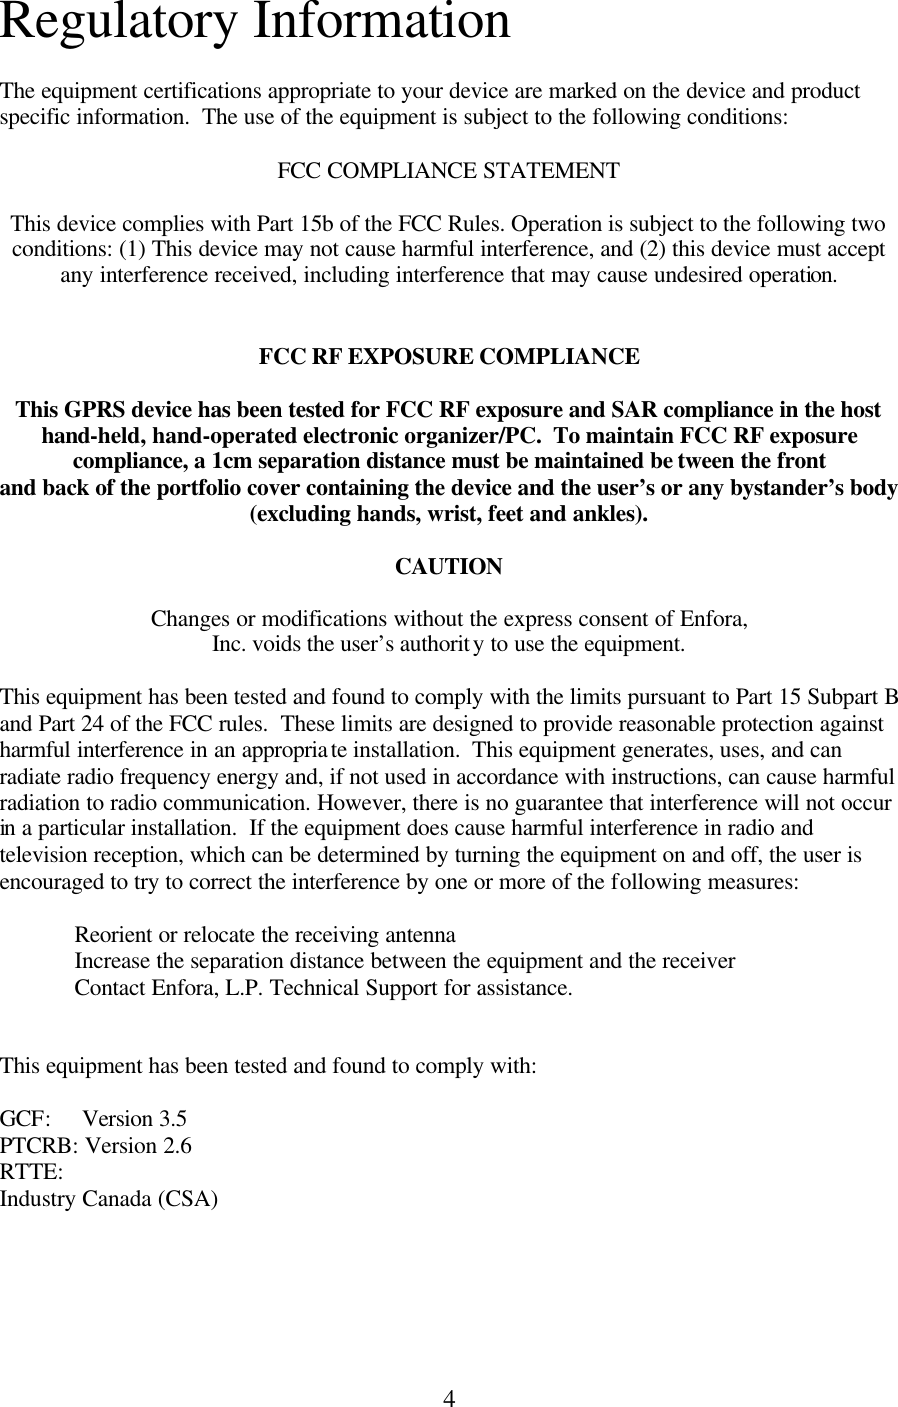 4 Regulatory Information  The equipment certifications appropriate to your device are marked on the device and product specific information.  The use of the equipment is subject to the following conditions:  FCC COMPLIANCE STATEMENT  This device complies with Part 15b of the FCC Rules. Operation is subject to the following two conditions: (1) This device may not cause harmful interference, and (2) this device must accept any interference received, including interference that may cause undesired operation.   FCC RF EXPOSURE COMPLIANCE  This GPRS device has been tested for FCC RF exposure and SAR compliance in the host hand-held, hand-operated electronic organizer/PC.  To maintain FCC RF exposure compliance, a 1cm separation distance must be maintained be tween the front and back of the portfolio cover containing the device and the user’s or any bystander’s body (excluding hands, wrist, feet and ankles).  CAUTION  Changes or modifications without the express consent of Enfora, Inc. voids the user’s authority to use the equipment.  This equipment has been tested and found to comply with the limits pursuant to Part 15 Subpart B and Part 24 of the FCC rules.  These limits are designed to provide reasonable protection against harmful interference in an appropriate installation.  This equipment generates, uses, and can radiate radio frequency energy and, if not used in accordance with instructions, can cause harmful radiation to radio communication. However, there is no guarantee that interference will not occur in a particular installation.  If the equipment does cause harmful interference in radio and television reception, which can be determined by turning the equipment on and off, the user is encouraged to try to correct the interference by one or more of the following measures:   Reorient or relocate the receiving antenna  Increase the separation distance between the equipment and the receiver  Contact Enfora, L.P. Technical Support for assistance.   This equipment has been tested and found to comply with:  GCF:     Version 3.5 PTCRB: Version 2.6 RTTE: Industry Canada (CSA)   